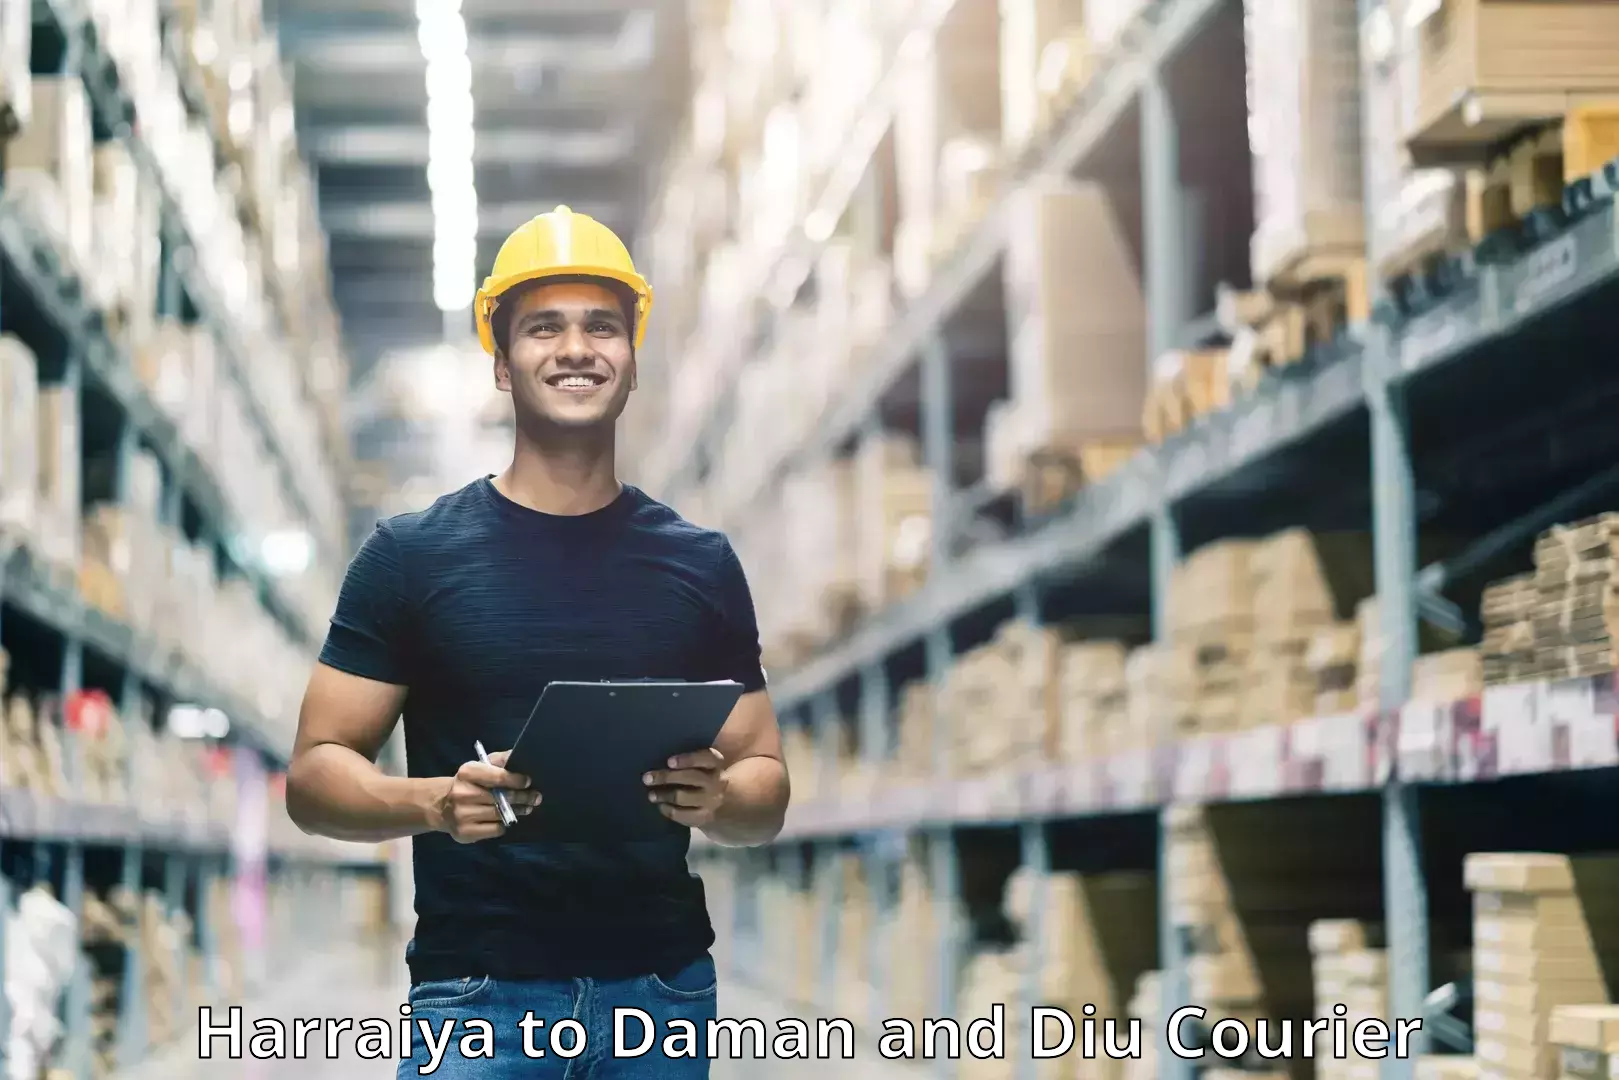 Multi-national courier services Harraiya to Daman and Diu